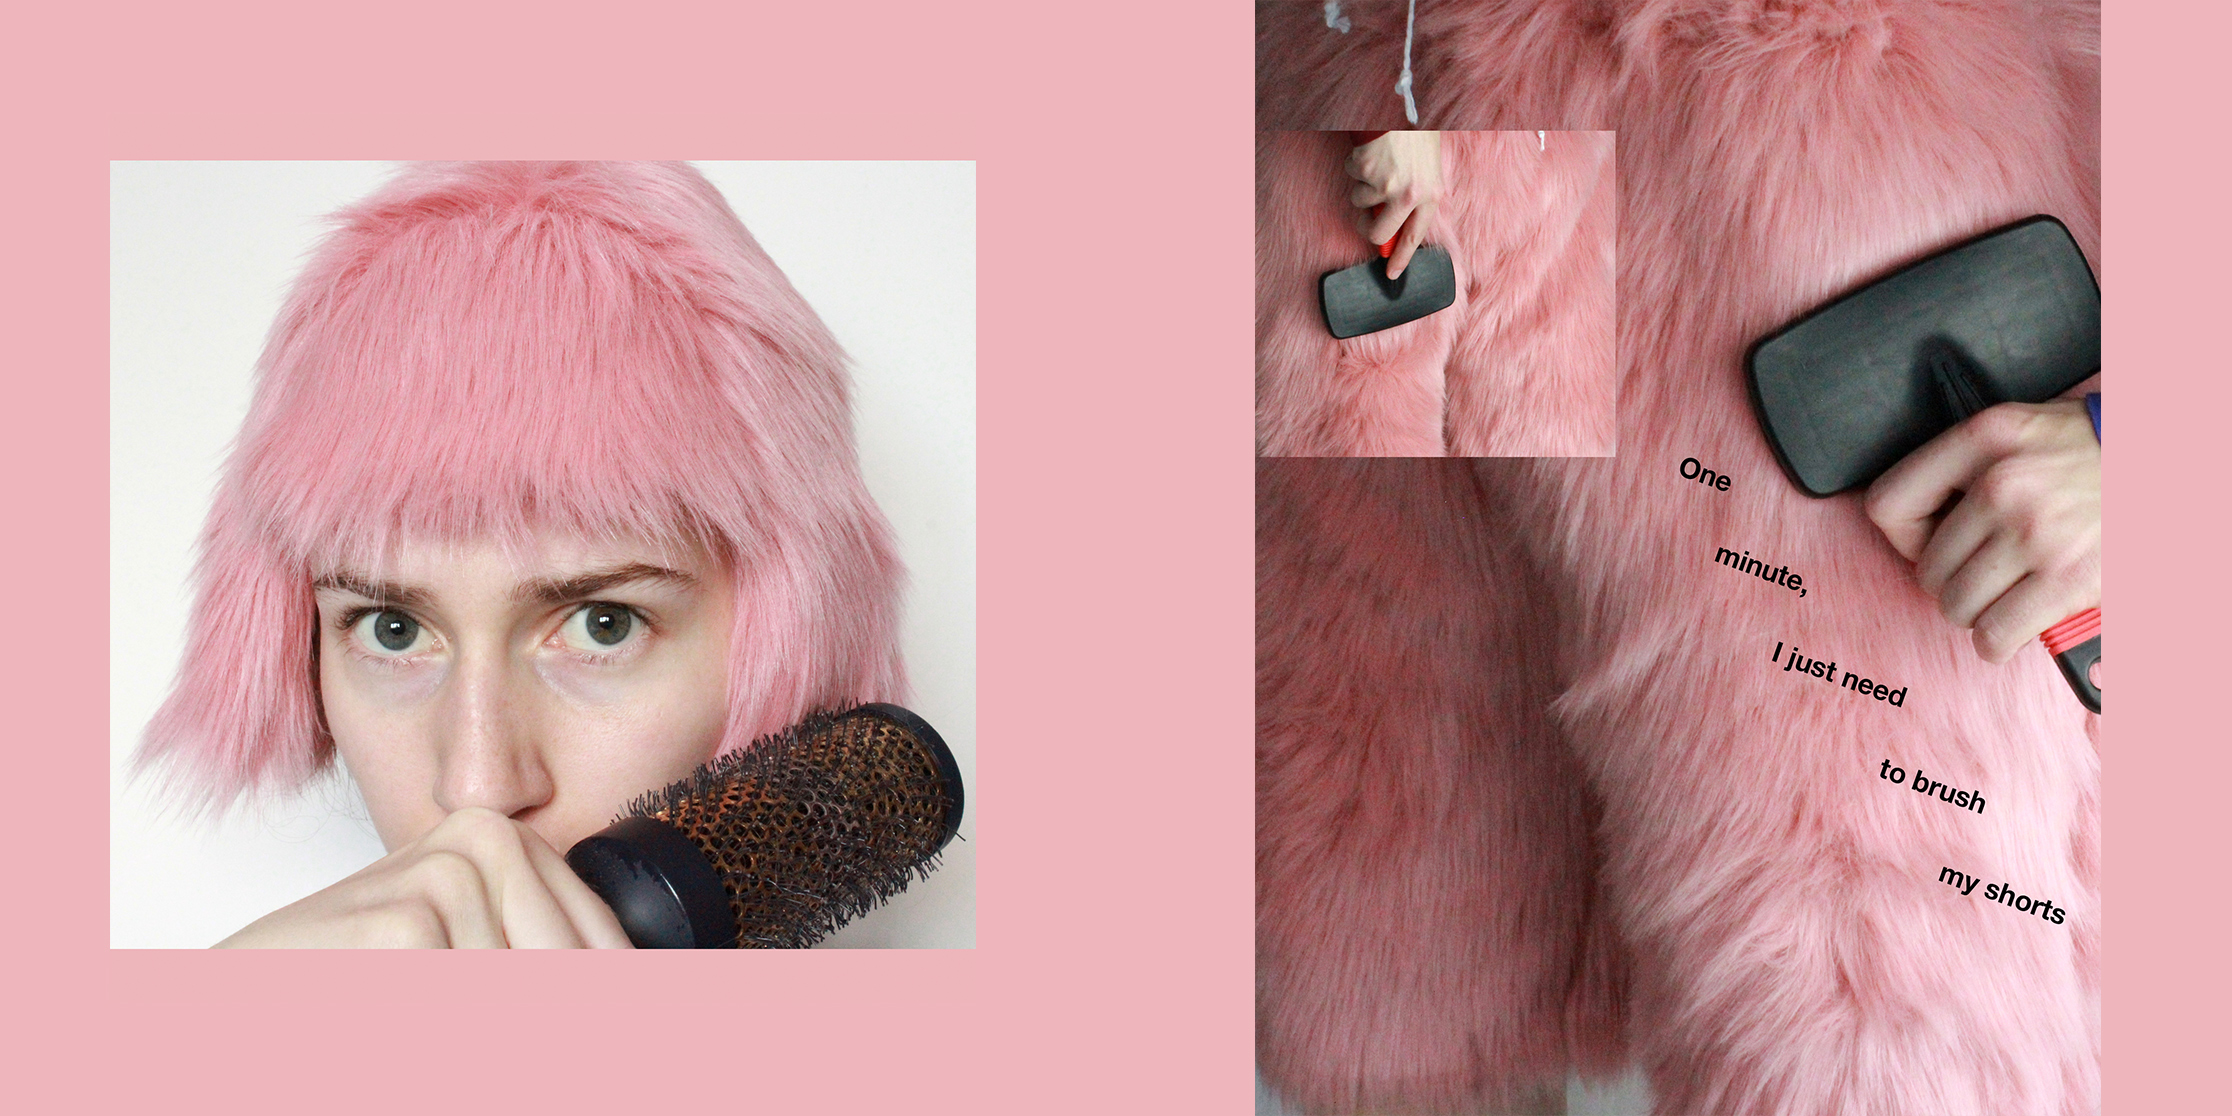 Photographs of character dressed in fake fur bodysuit brushing themselves